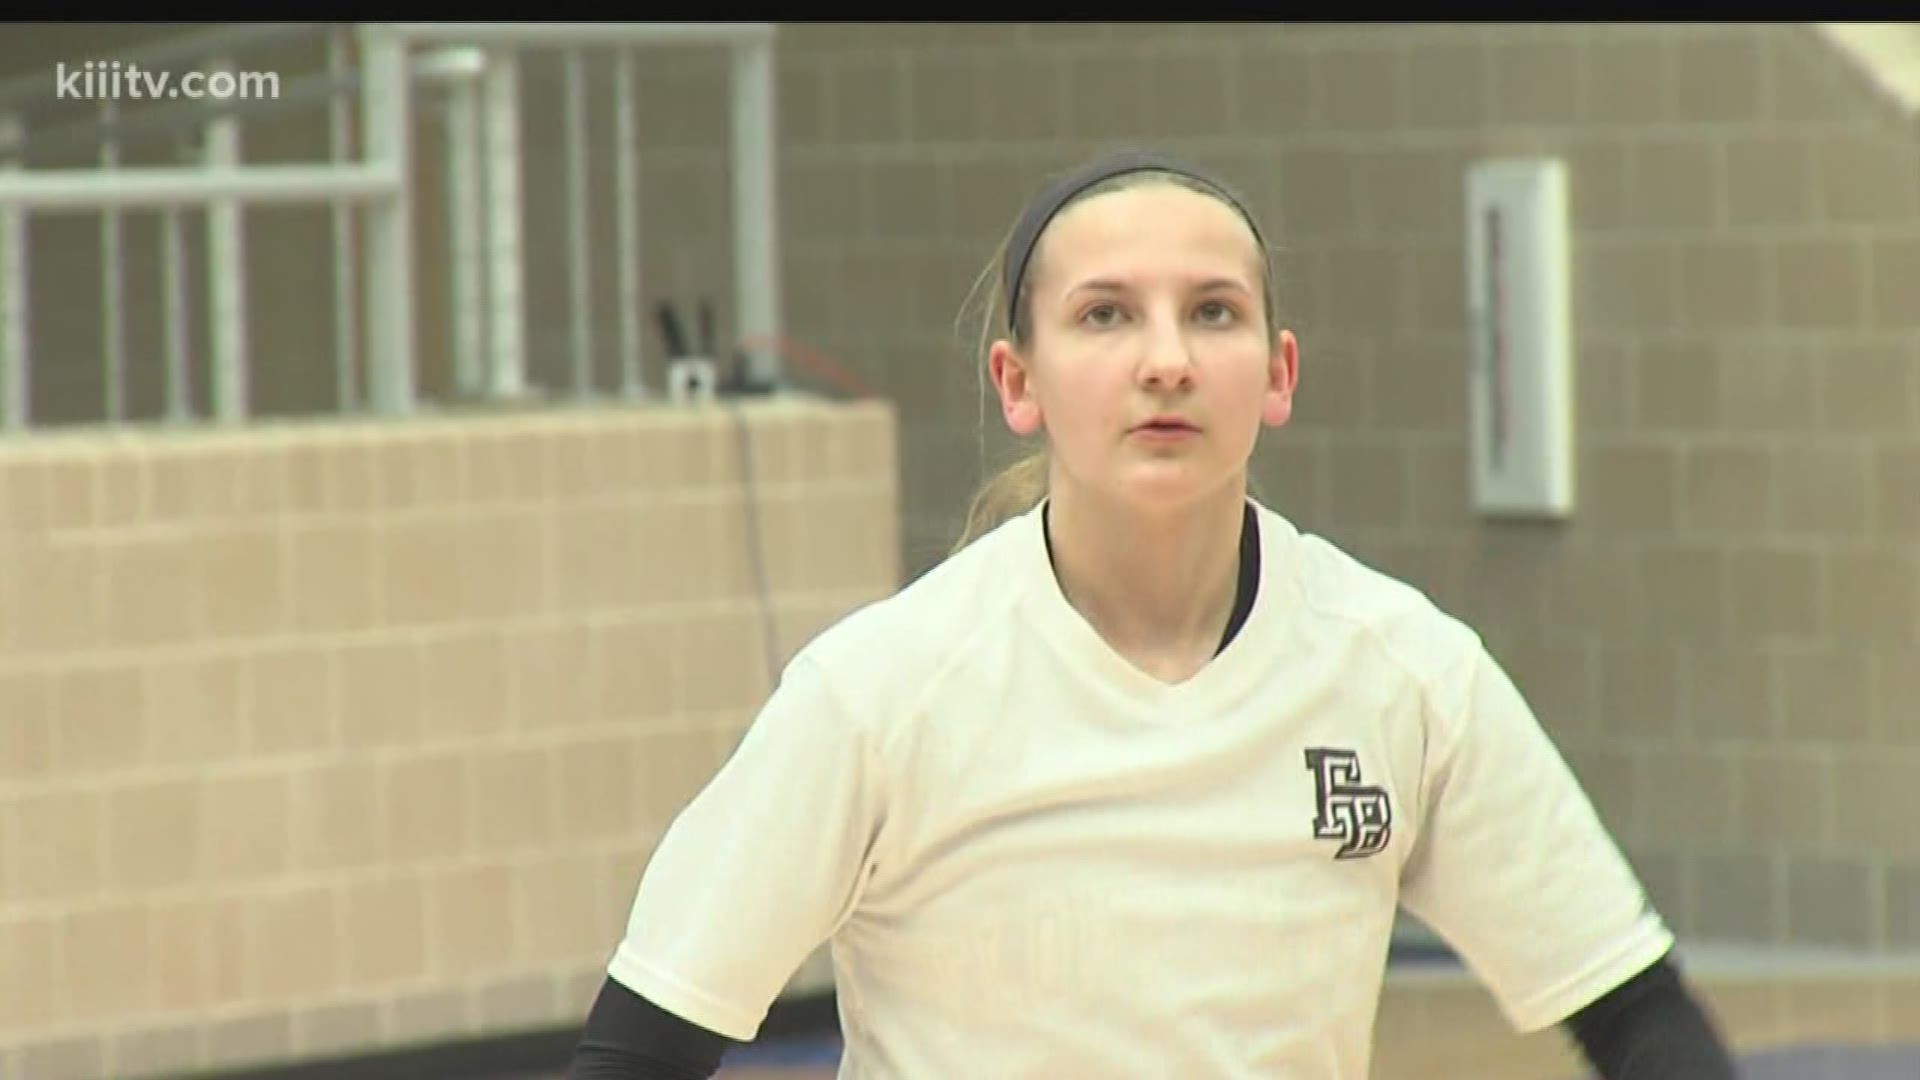 This week's "Athlete of the Week" is Flour Bluff's Meredith Marcum. 